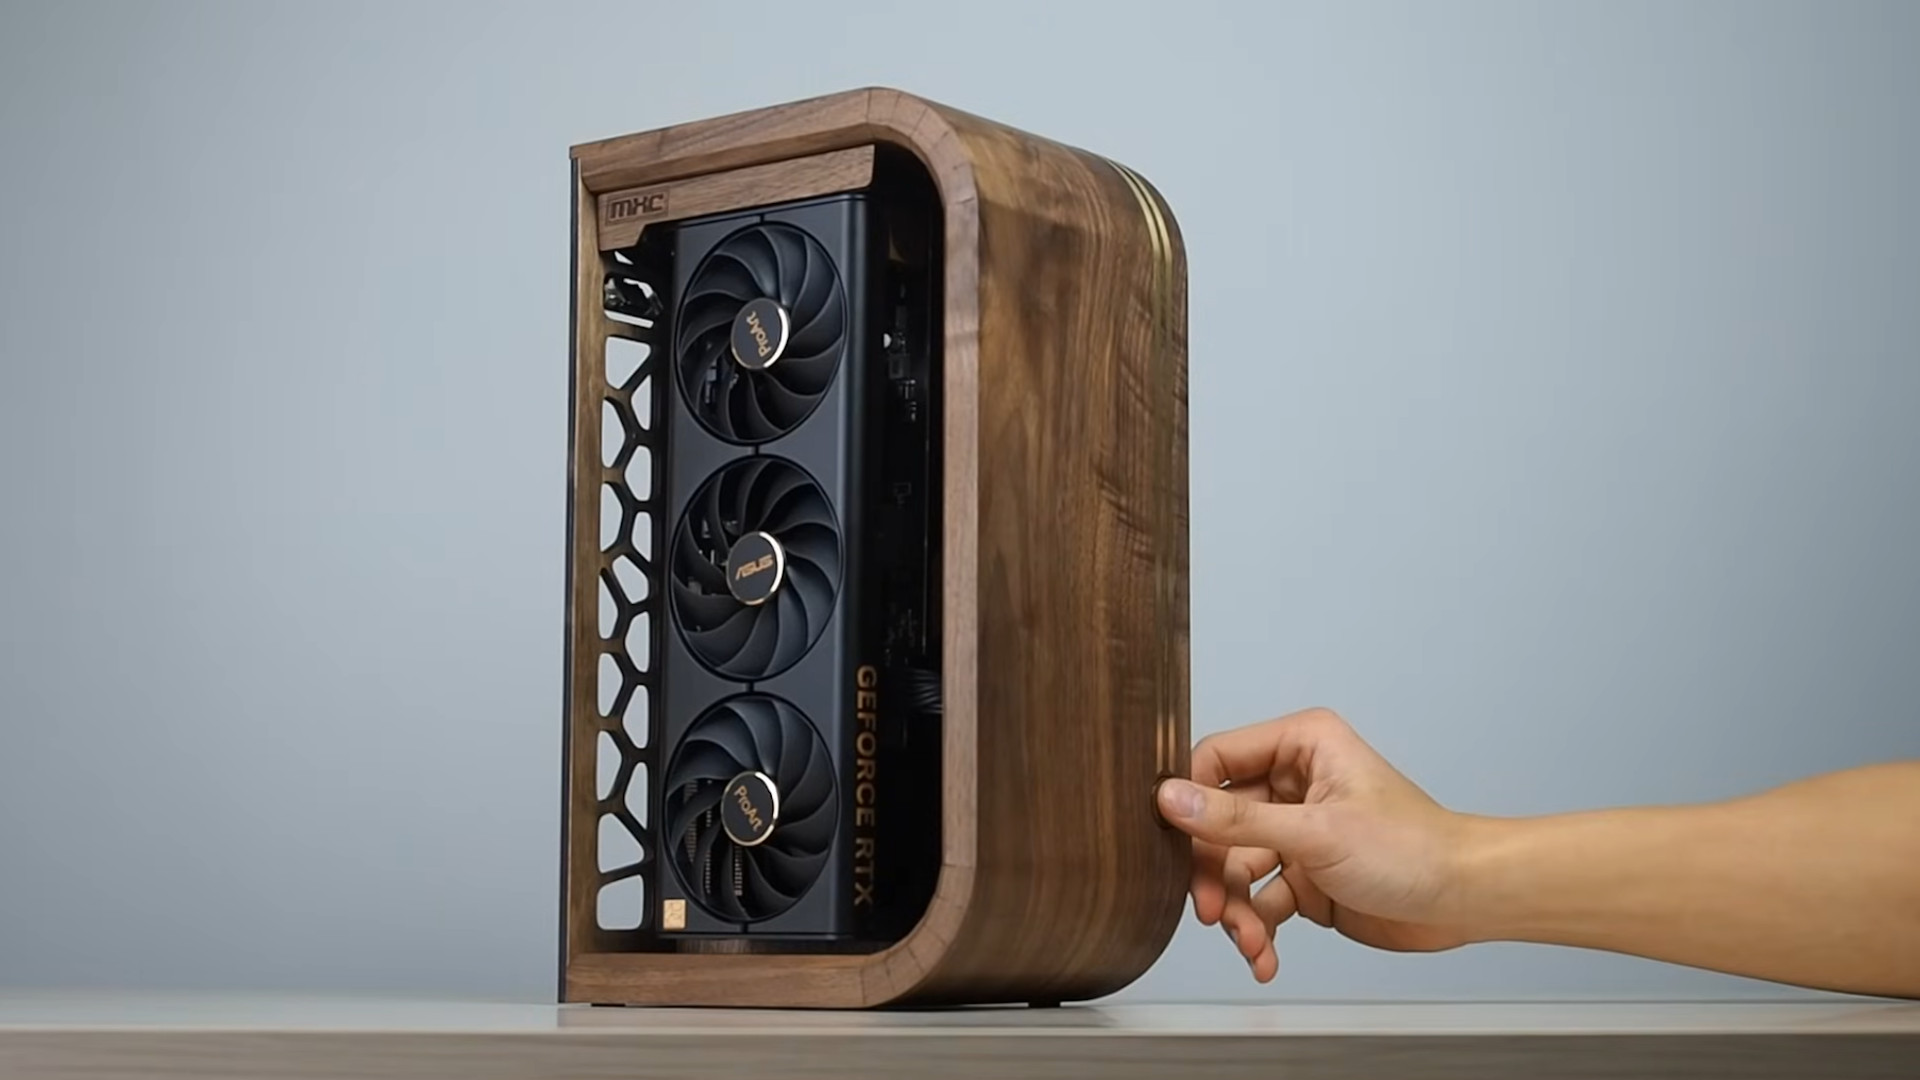 We're in love with this stunning Intel-powered wood gaming PC